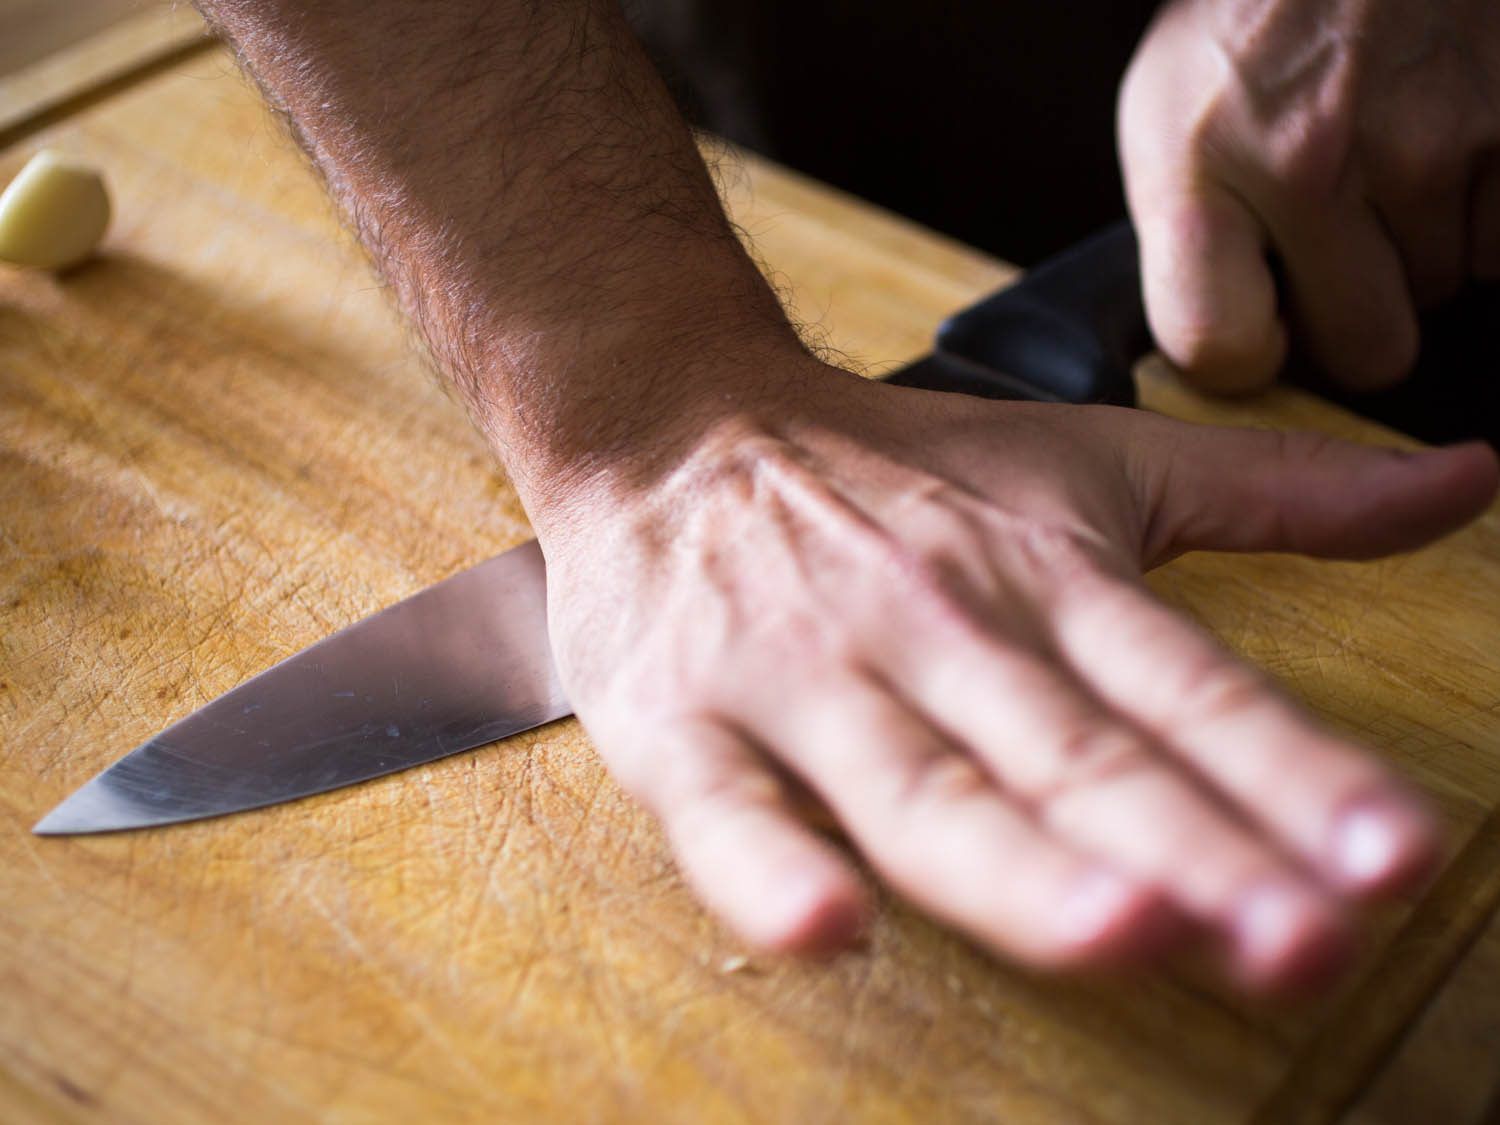 Crushing garlic with the side of a knife.